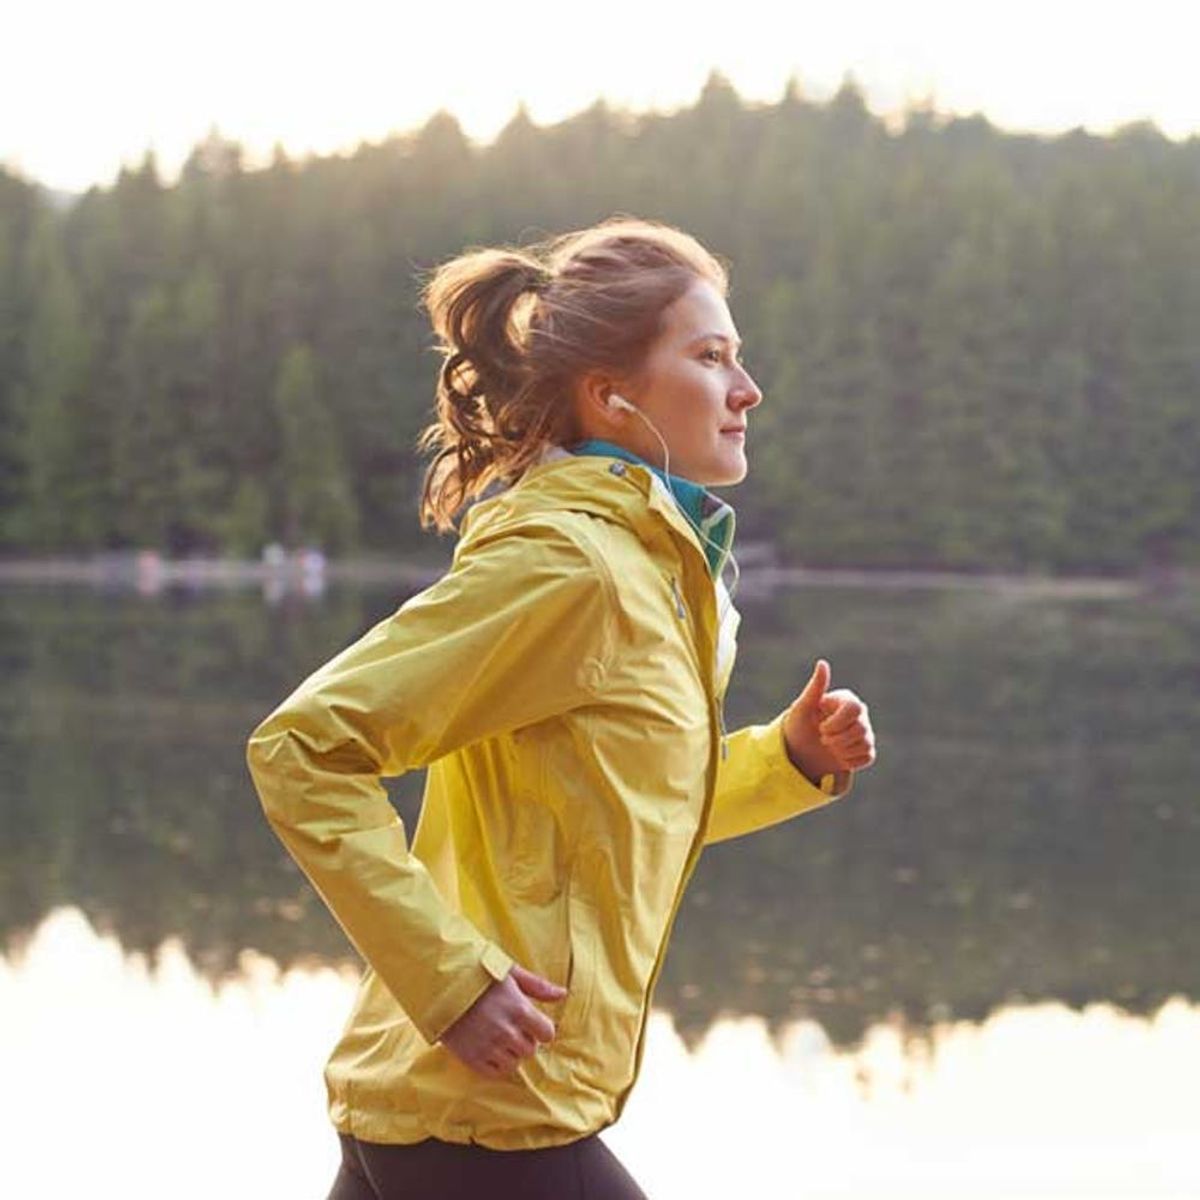 This One Study Will Make You Want to Be a Runner